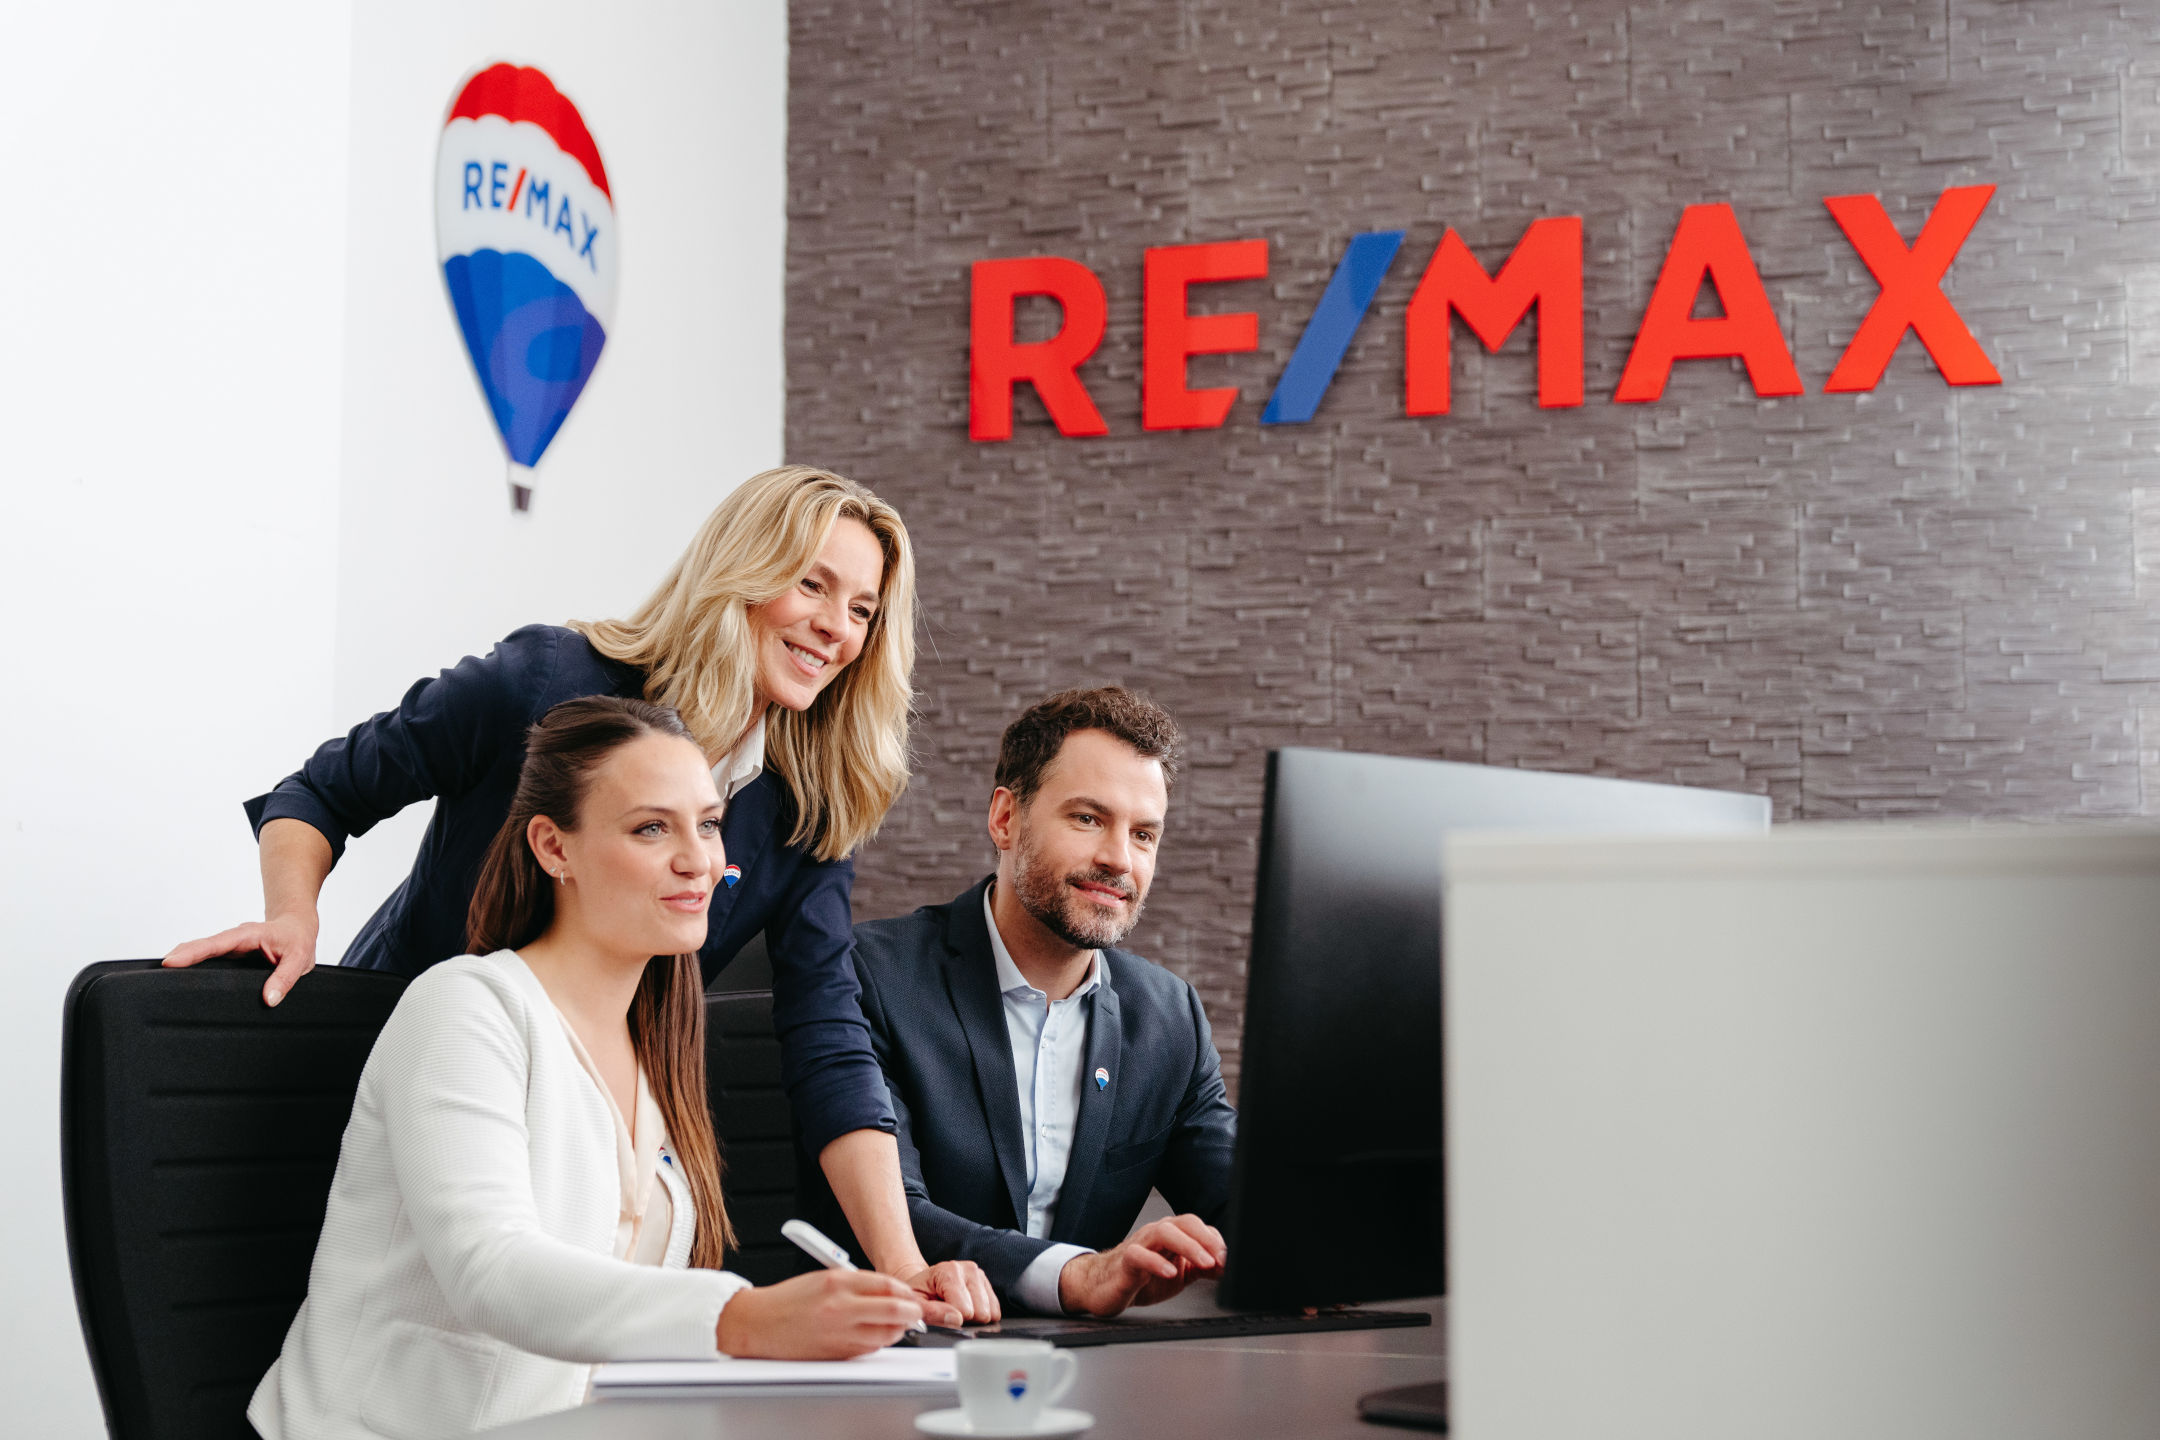 Press Releases and RE/MAX reports